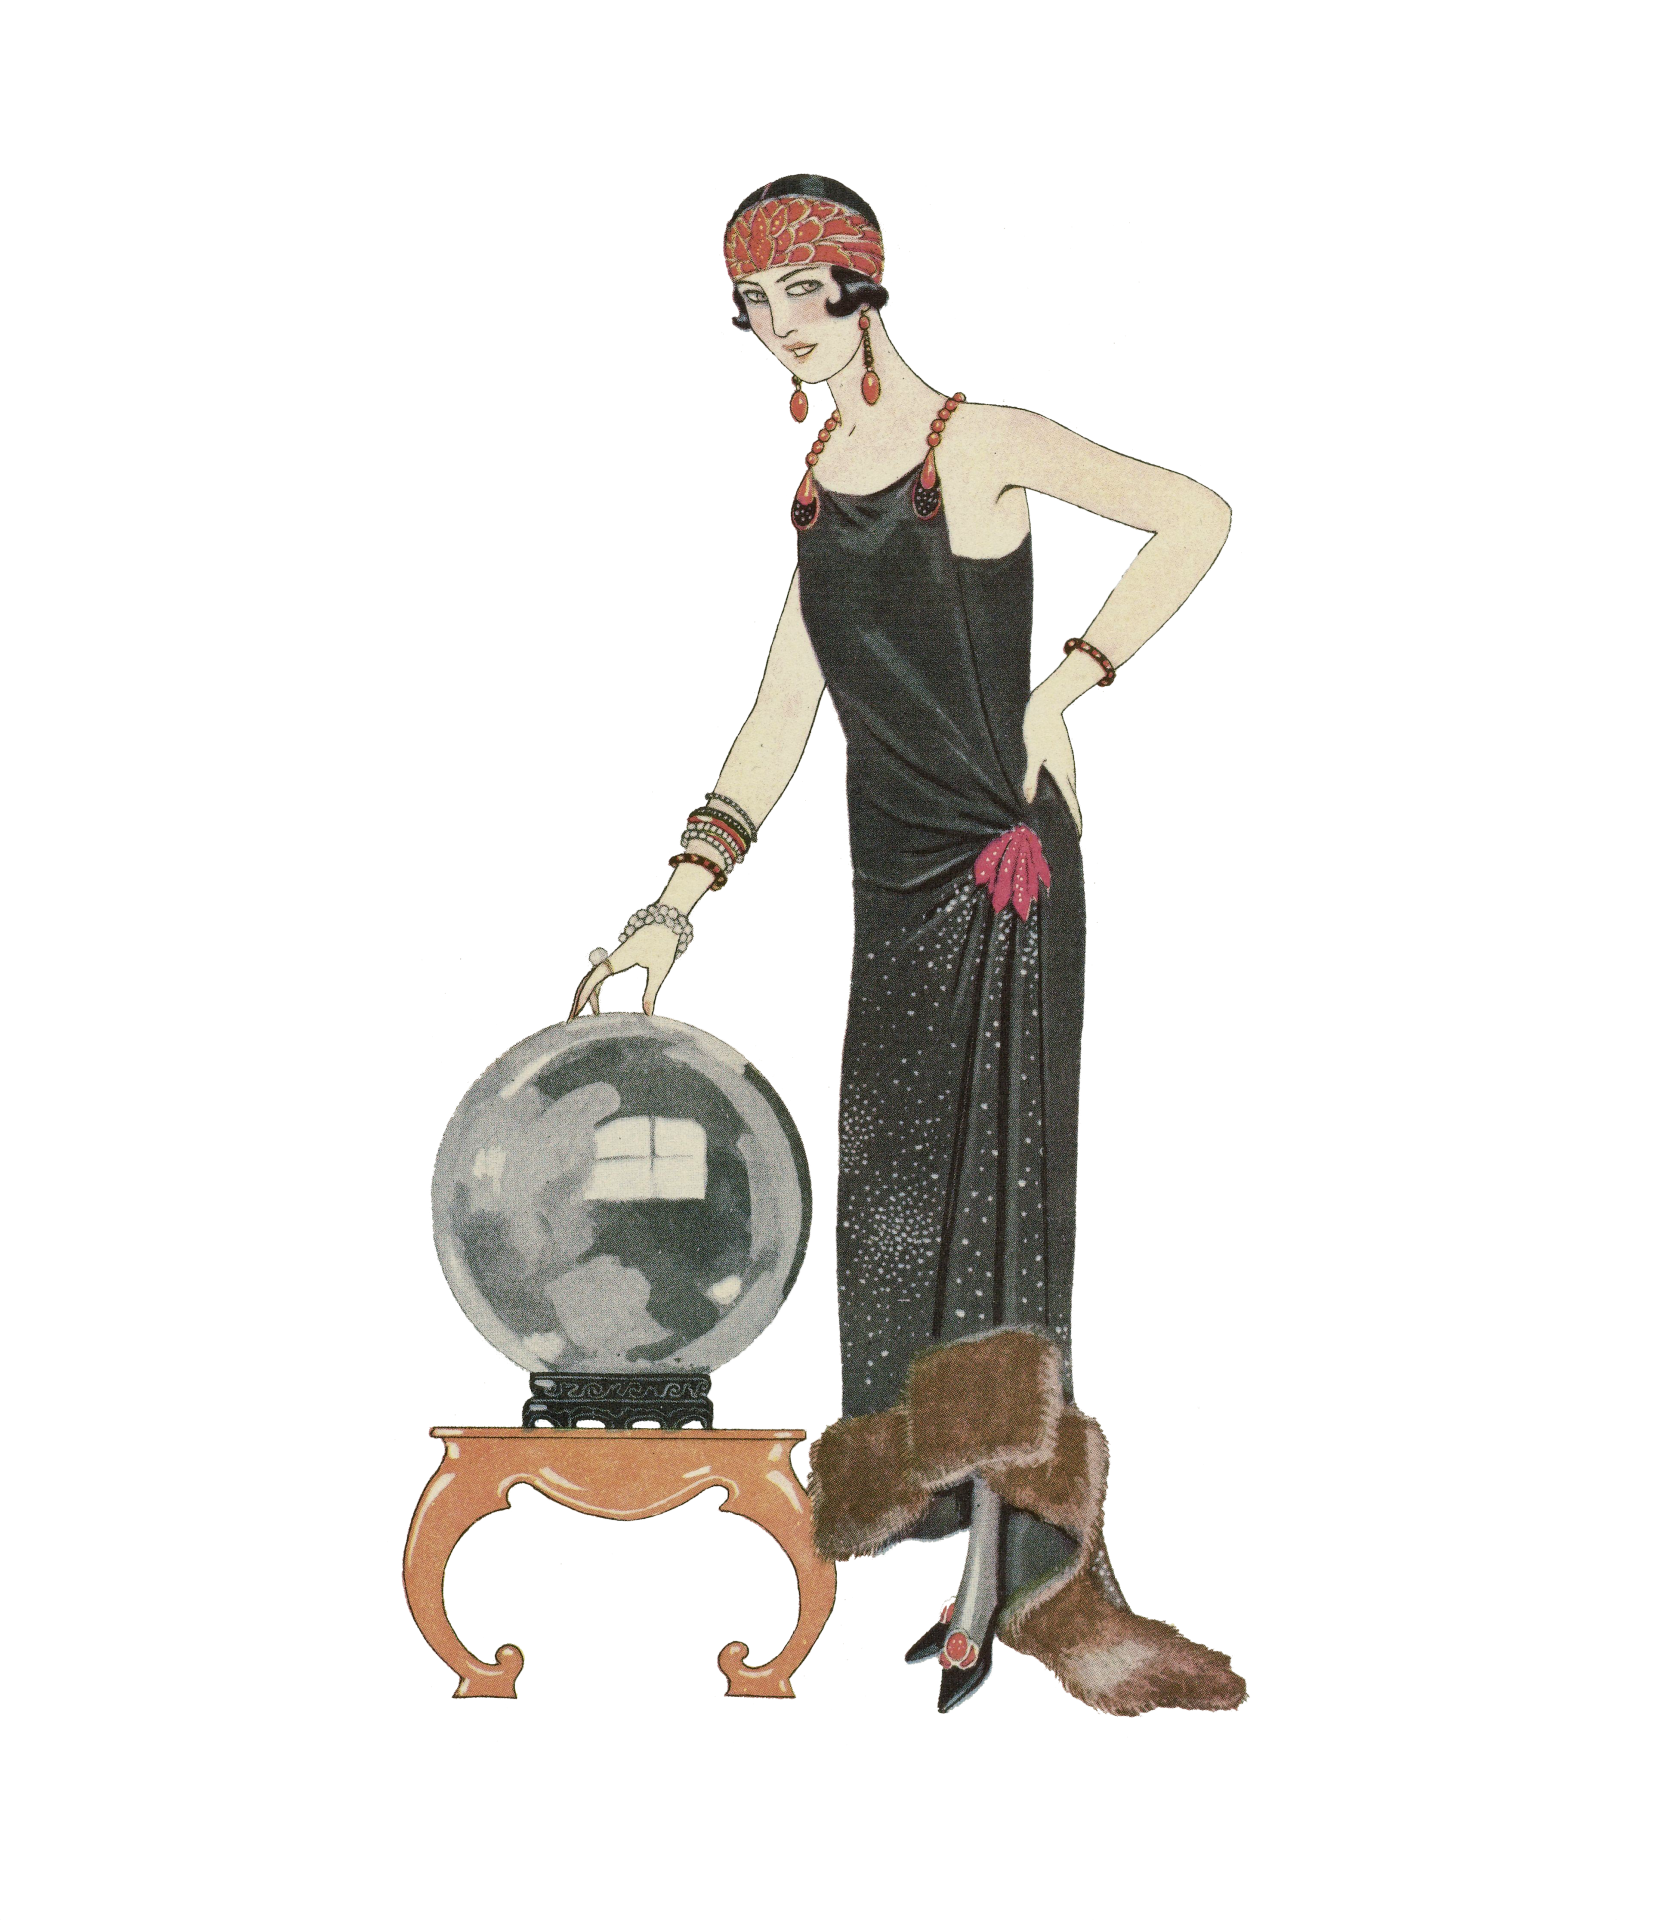 Vintage fashion flapper woman with crystal ball 1920s paris couture clipart on transparent png background